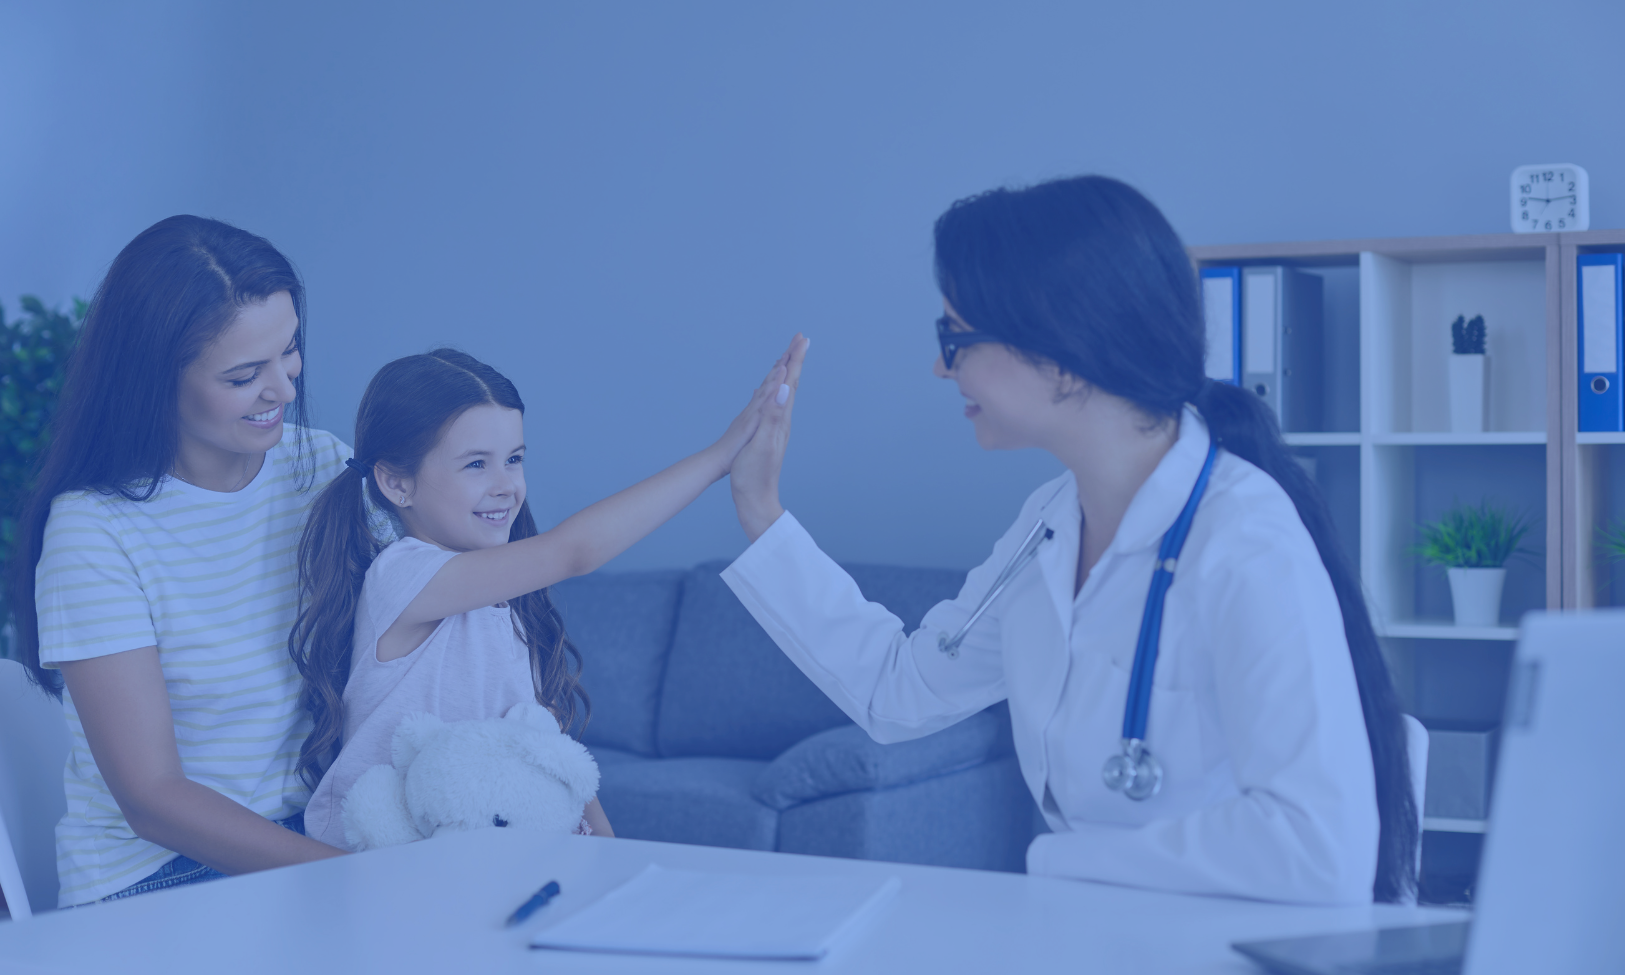 Image of a young girl with brown hair high-fiving her female doctor during a medical appointment, with her mother watching and smiling. The setting is a modern doctor's office, illustrating a supportive and positive healthcare environment for children. The doctor is dressed in a white lab coat, suggesting a professional and caring interaction.